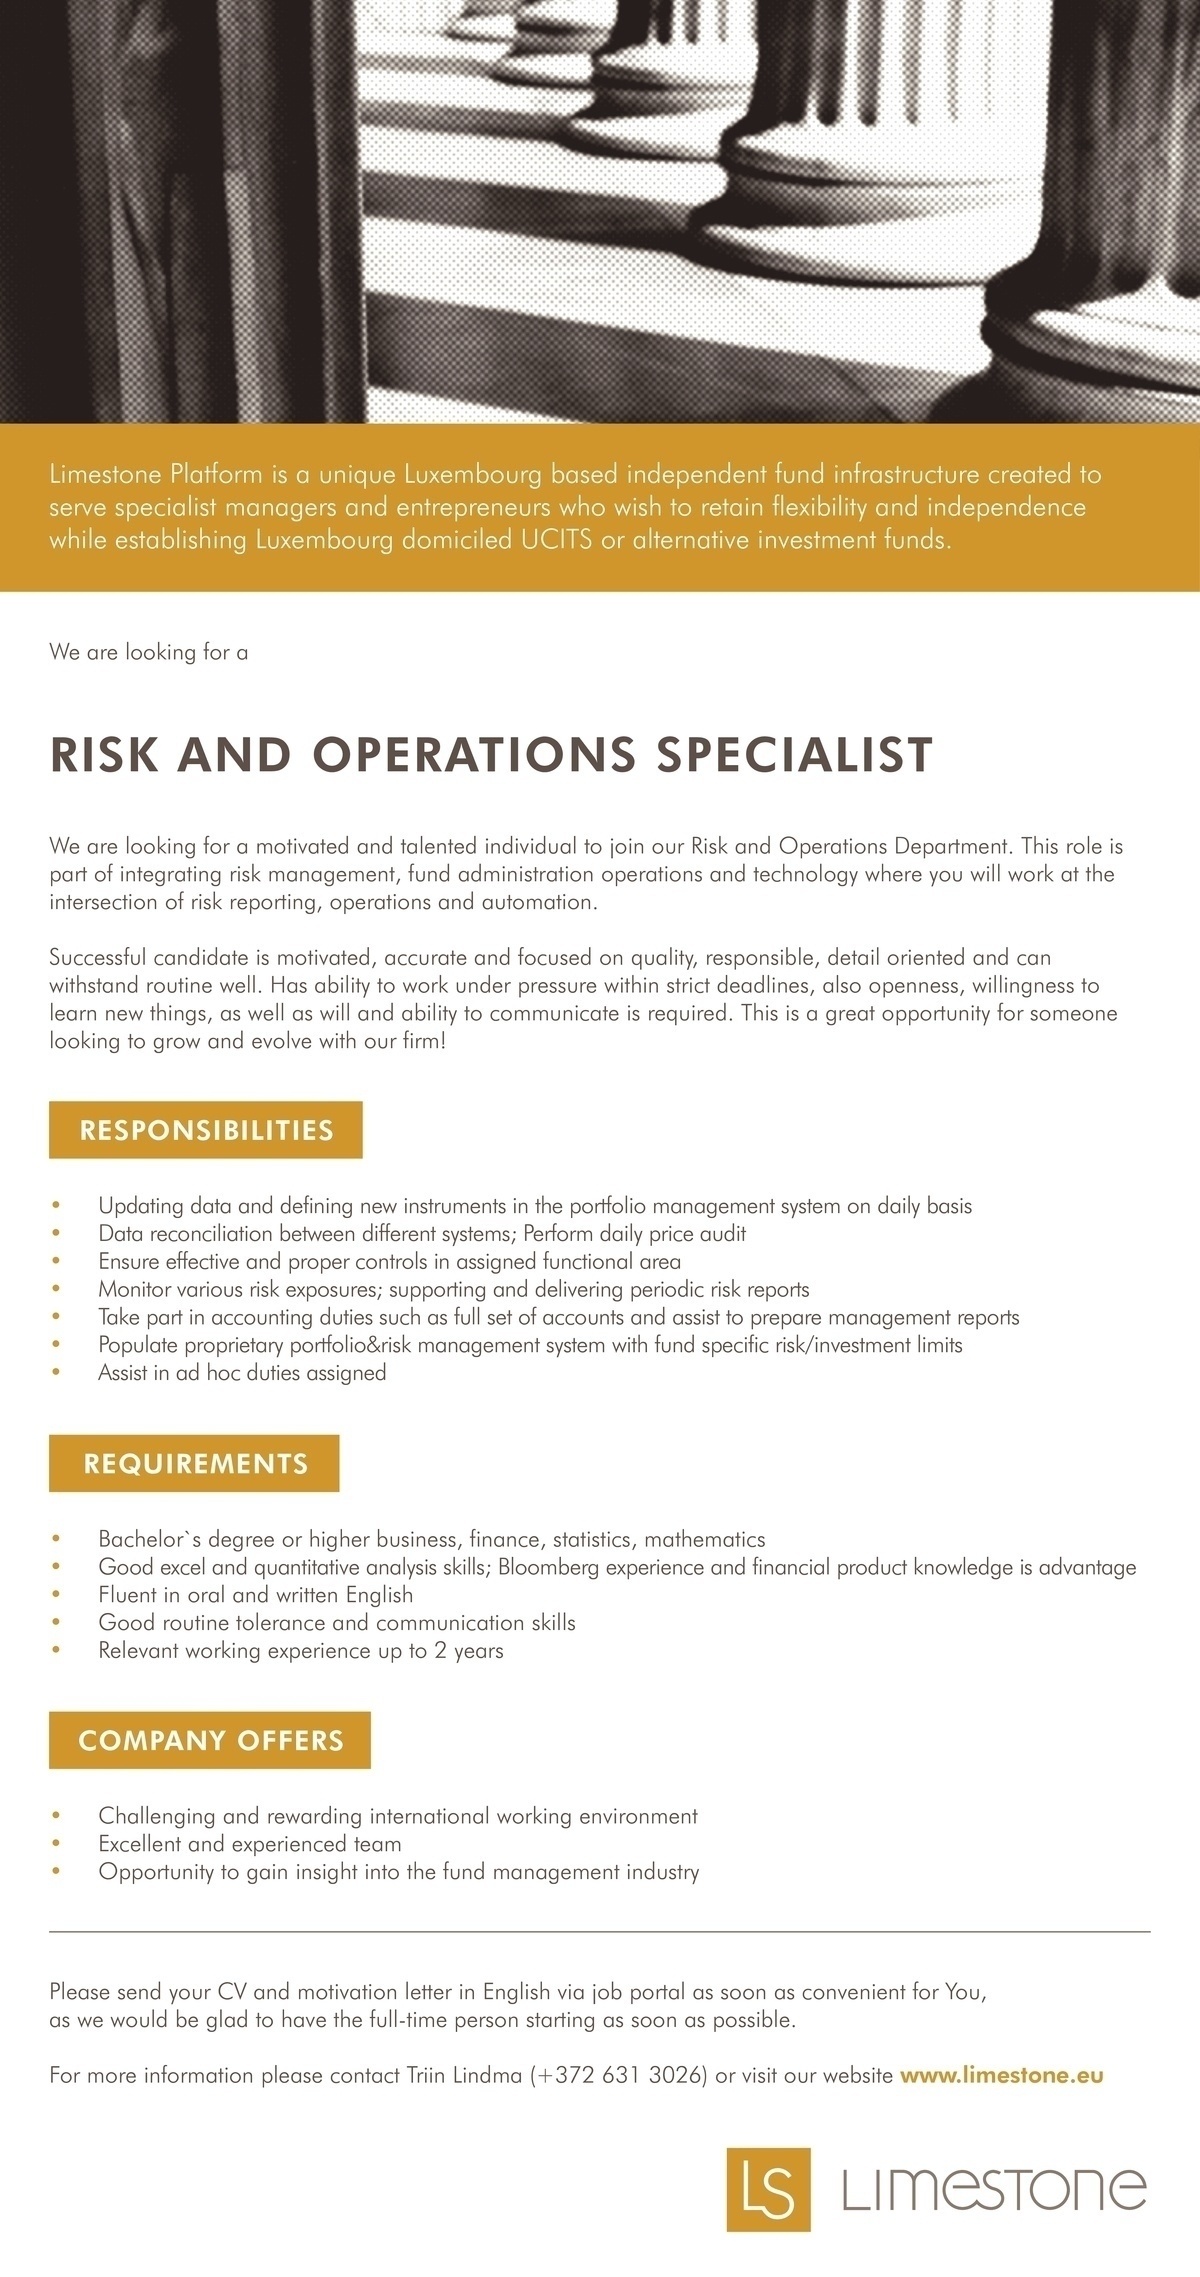 LIMESTONE PLATFORM AS RISK AND OPERATIONS SPECIALIST